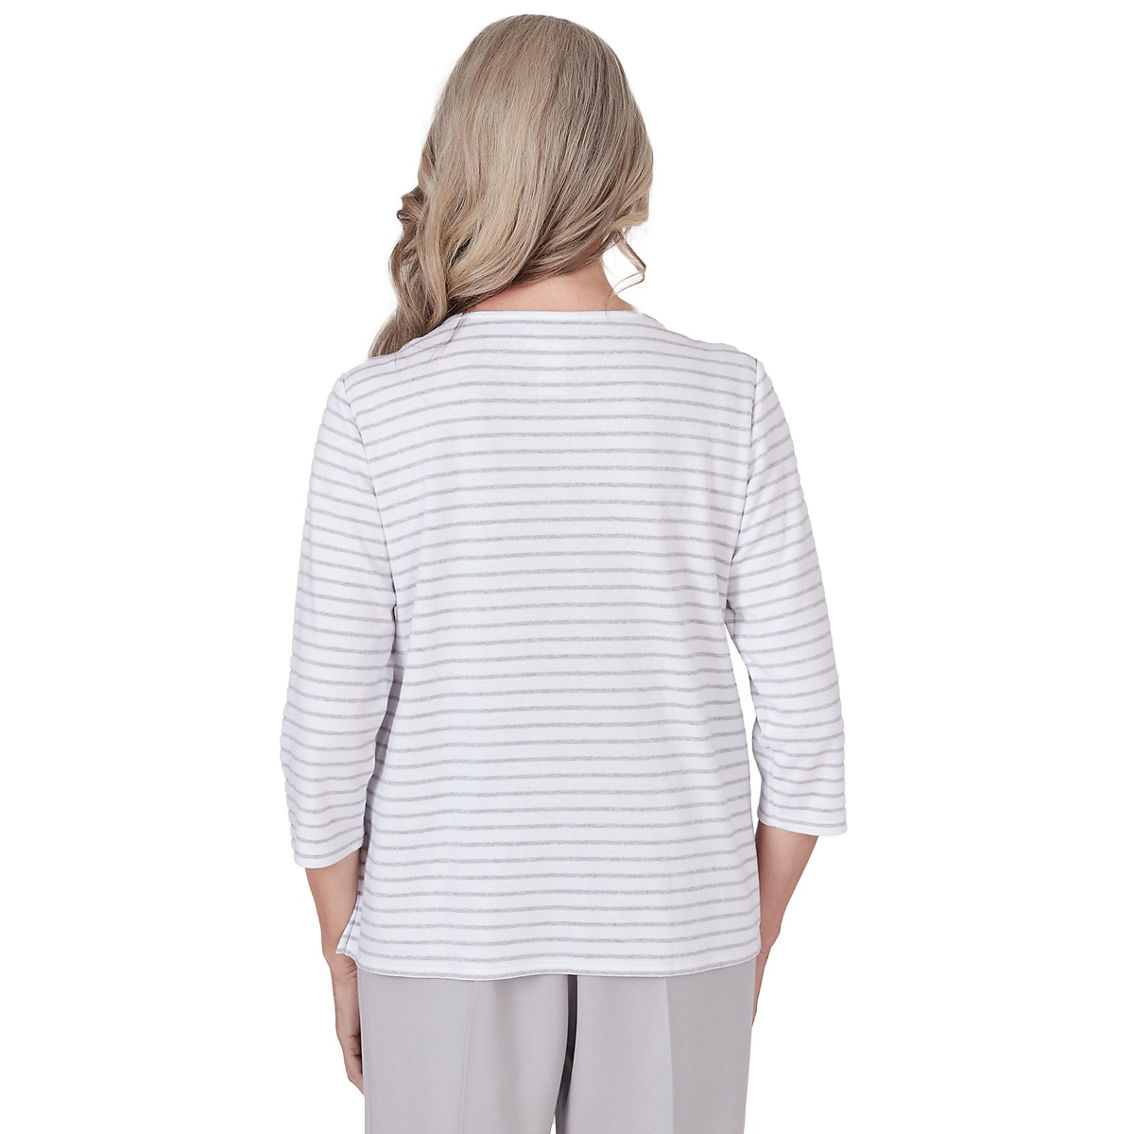 Alfred Dunner Women's Charleston Women's Striped Embroidered Top - Image 2 of 5